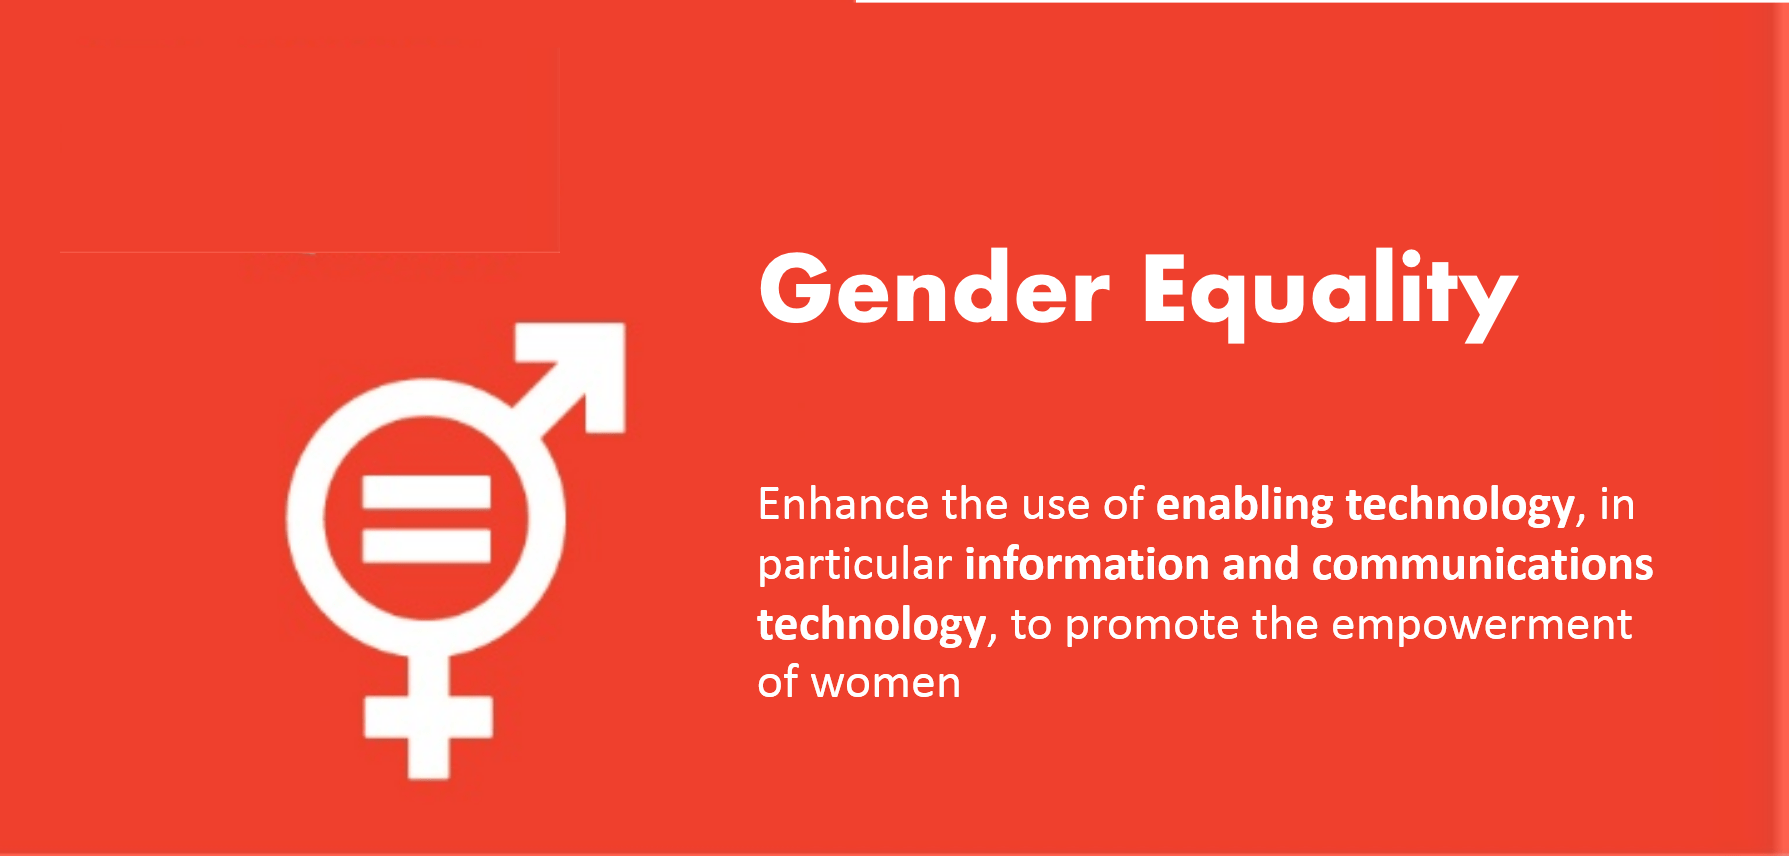 What Change?" For More Gender Equality Online – Collaboration on International Policy for East and Southern Africa